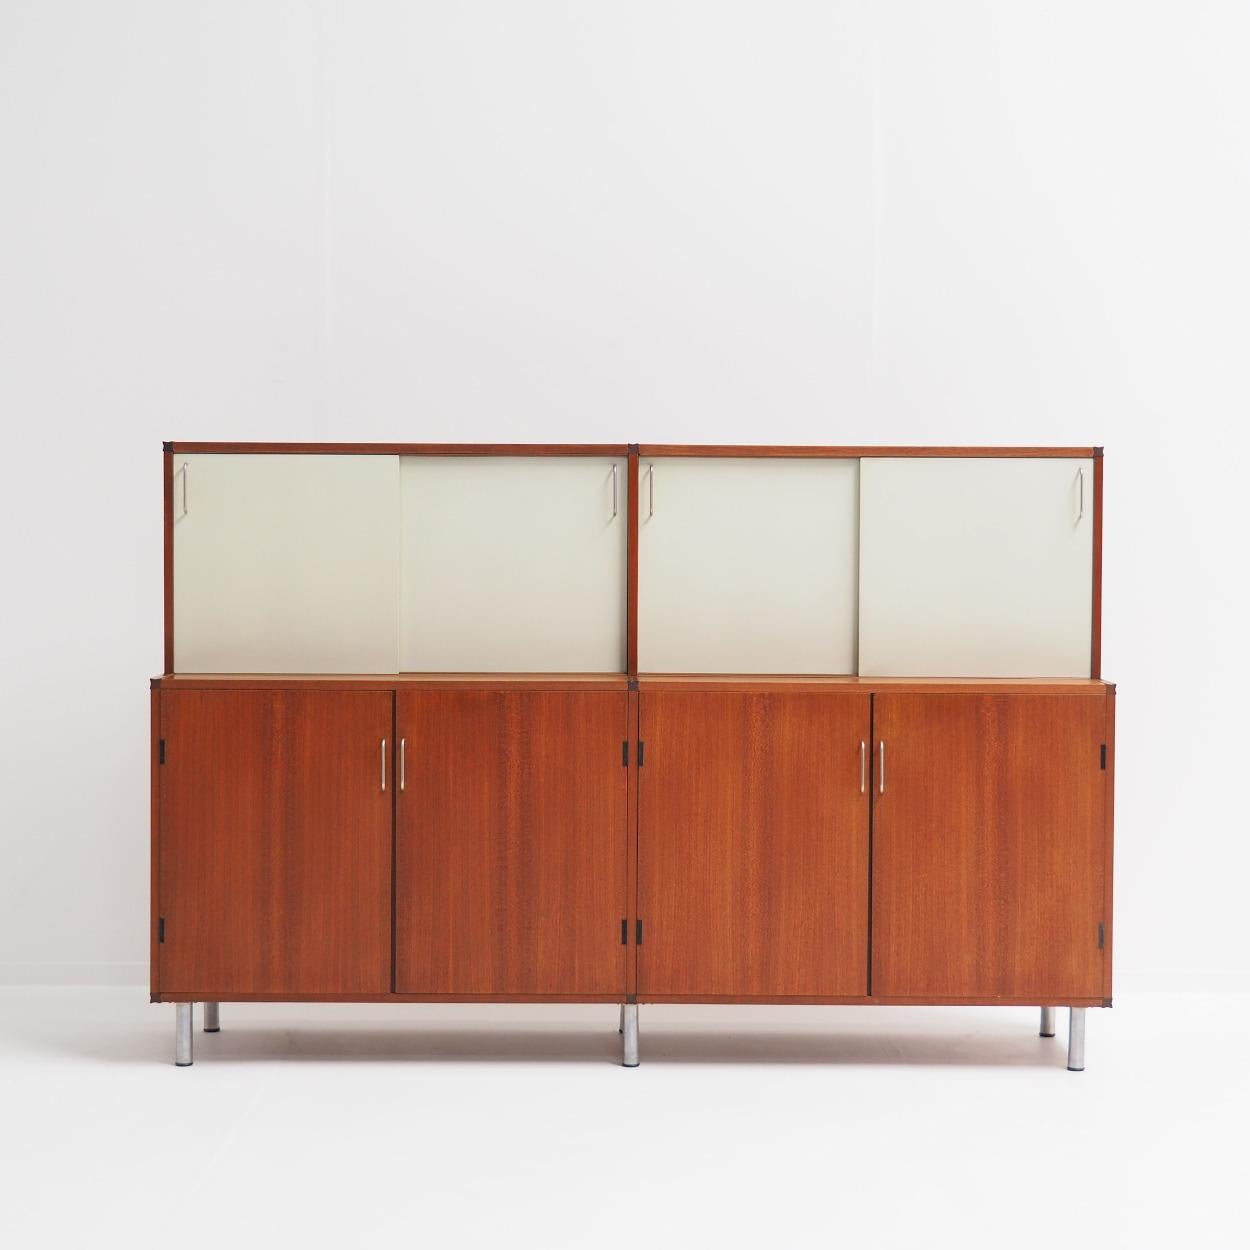 Beautiful double-decker cabinet designed by Cees Braakman for Pastoe. It comes from the 'Made to Measure' series that was produced in the Netherlands from the early 1950s to the mid-1960s.

With its diversity in height, colour and use of materials,